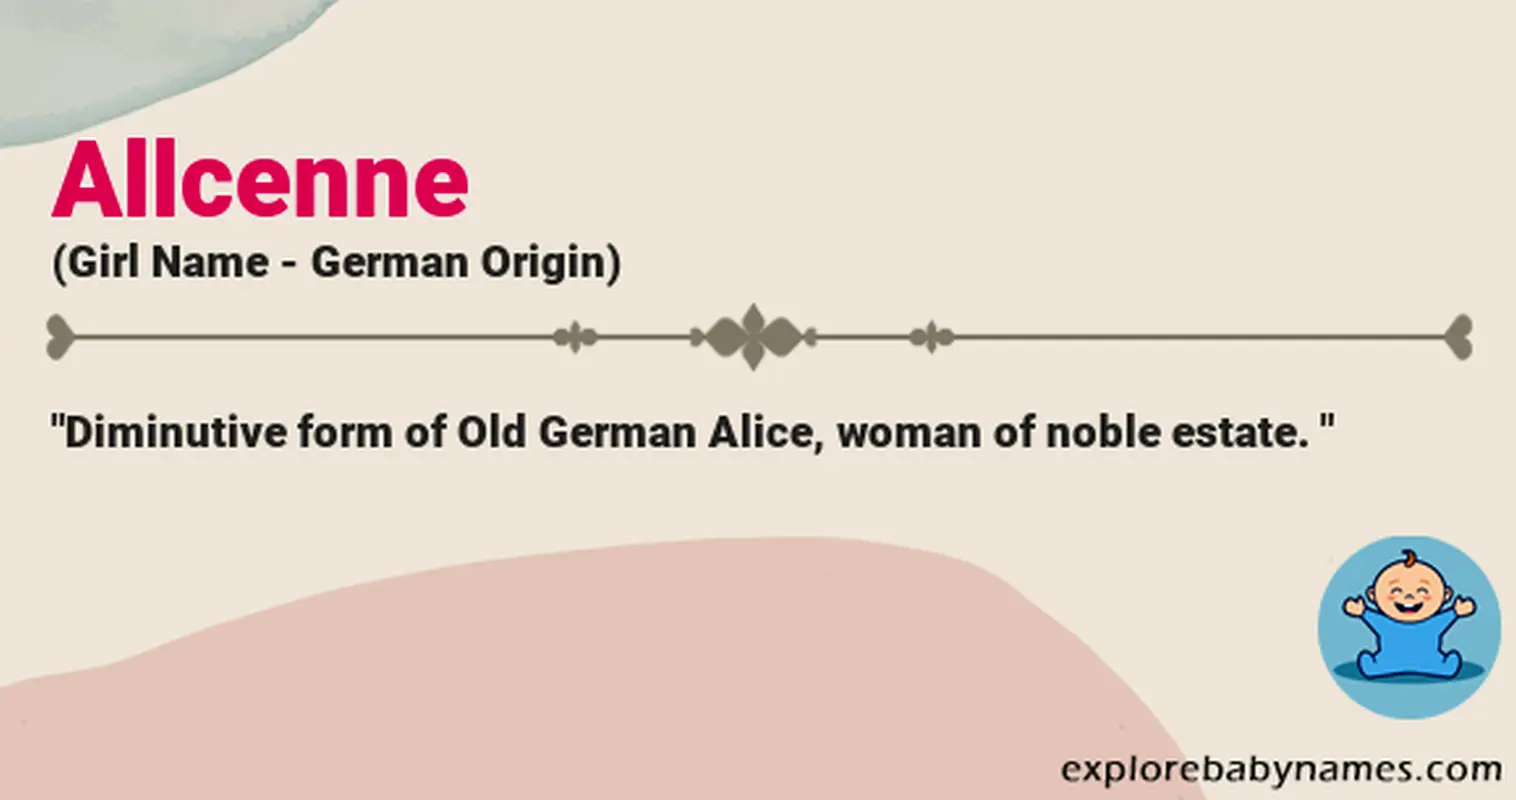 Meaning of Allcenne